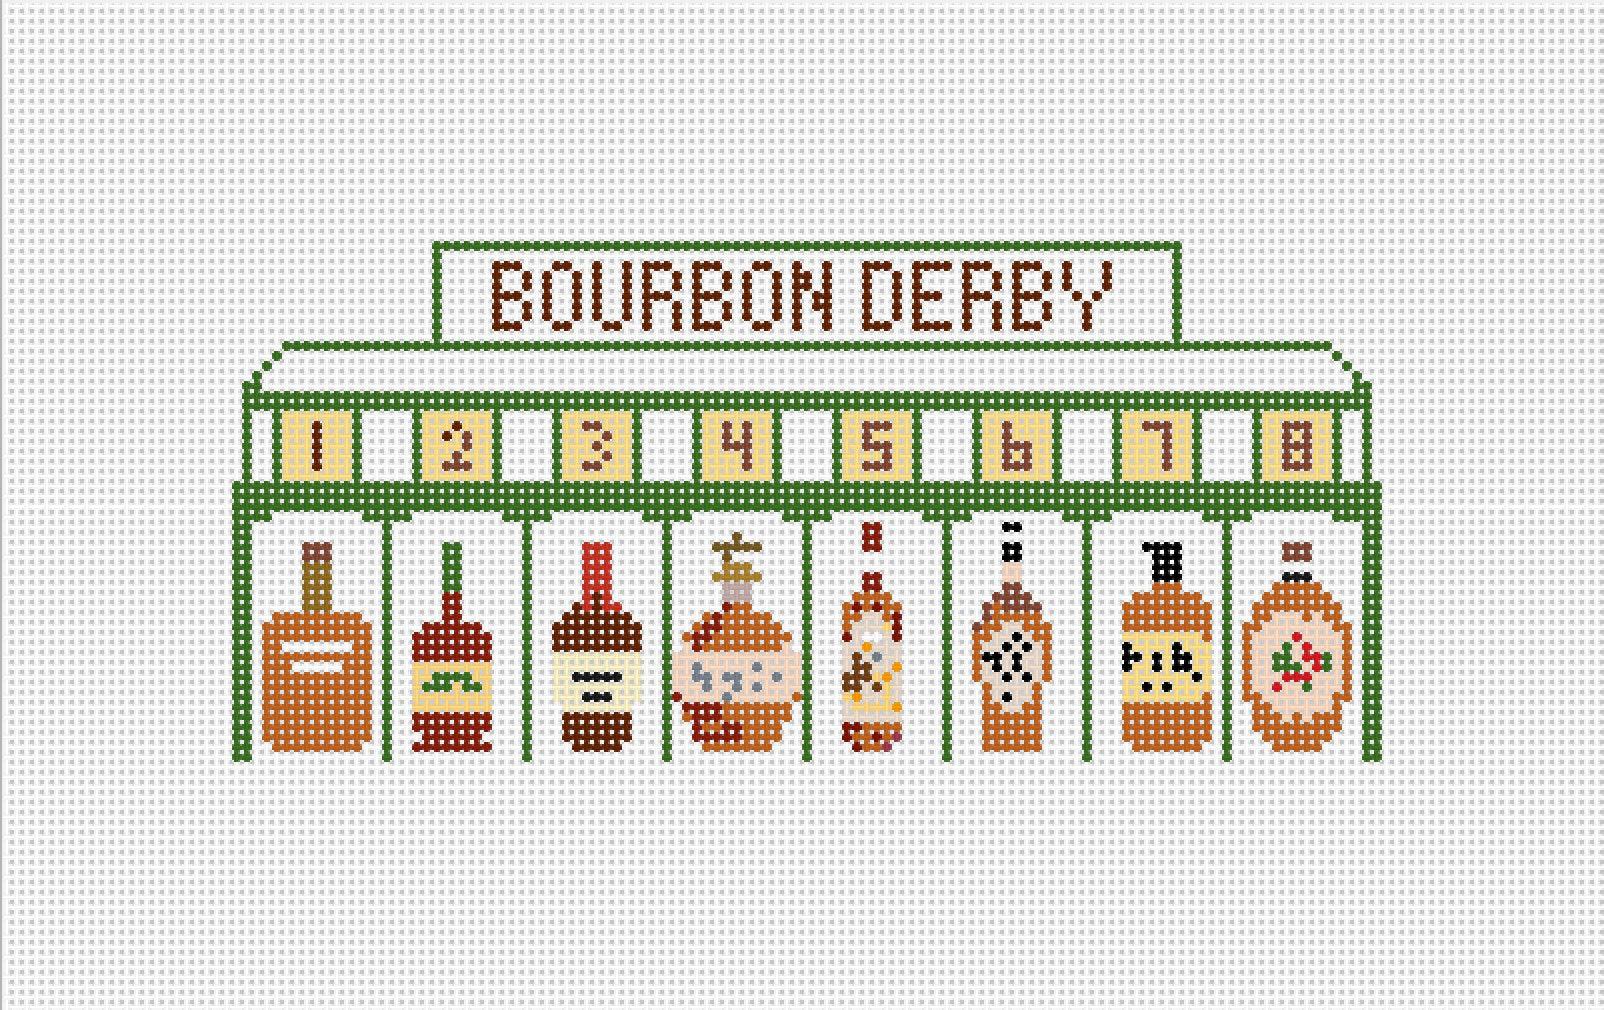 Bourbon Derby Needlepoint Canvas - Needlepoint by Laura